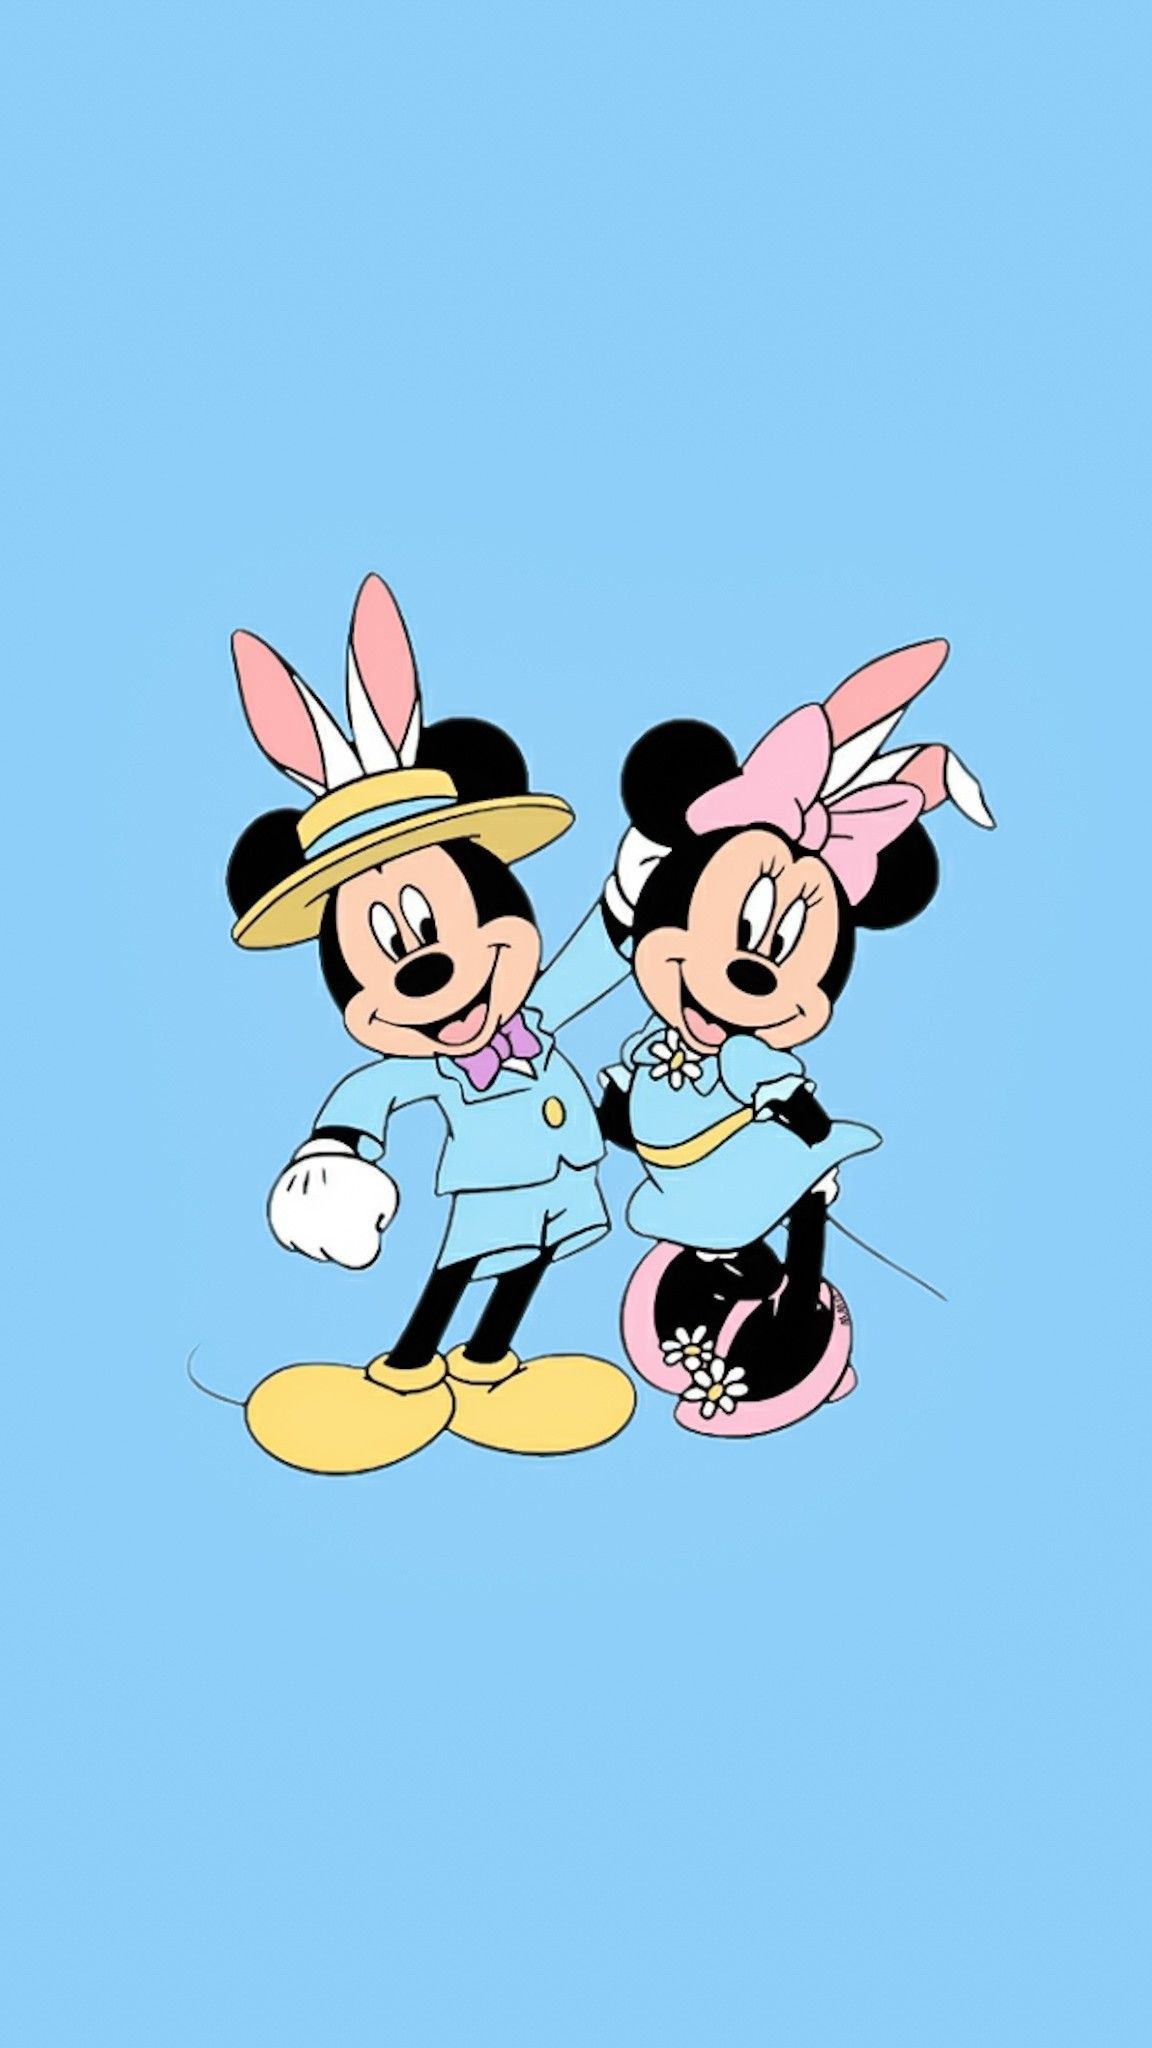 Mickey and Minnie mouse wallpaper - Minnie Mouse, Mickey Mouse